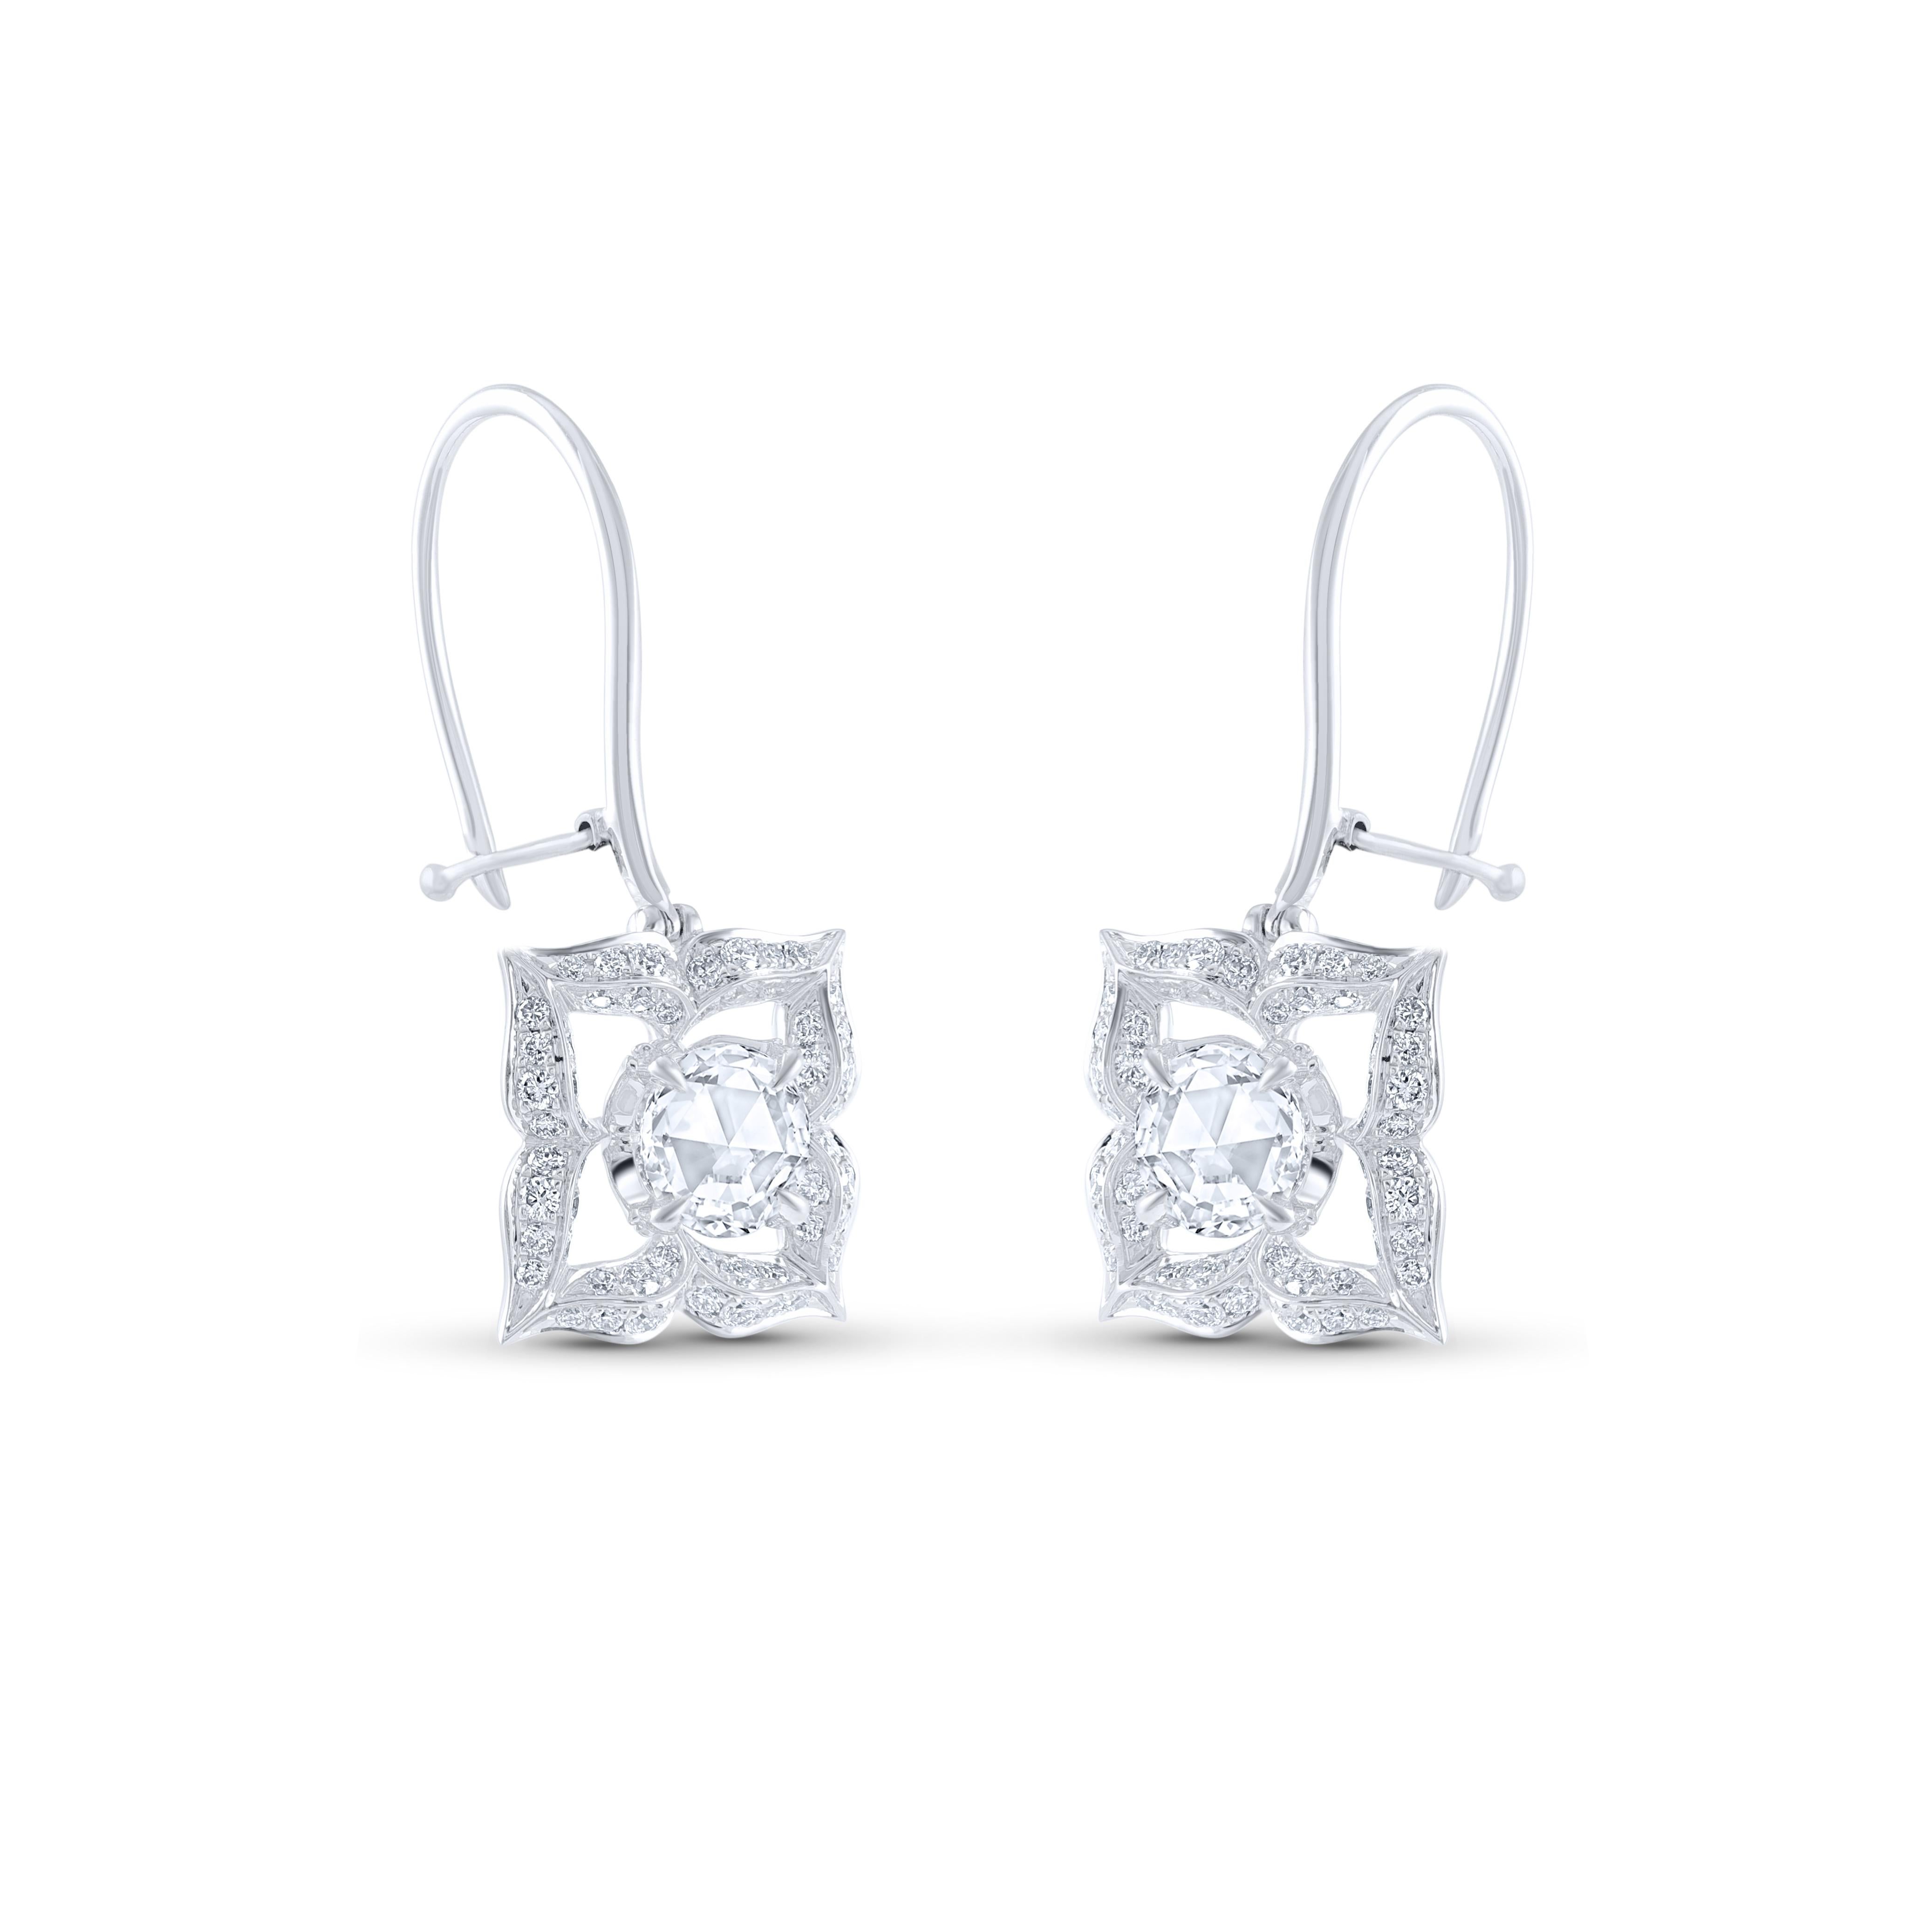 These beautiful earrings are studded with 112 brilliant cut natural diamonds and 2 rose cut round diamond. The total diamond weight of these diamond earrings is 0.95 carats. All the diamonds are D-F color, IF-VS clarity. This white gold earrings